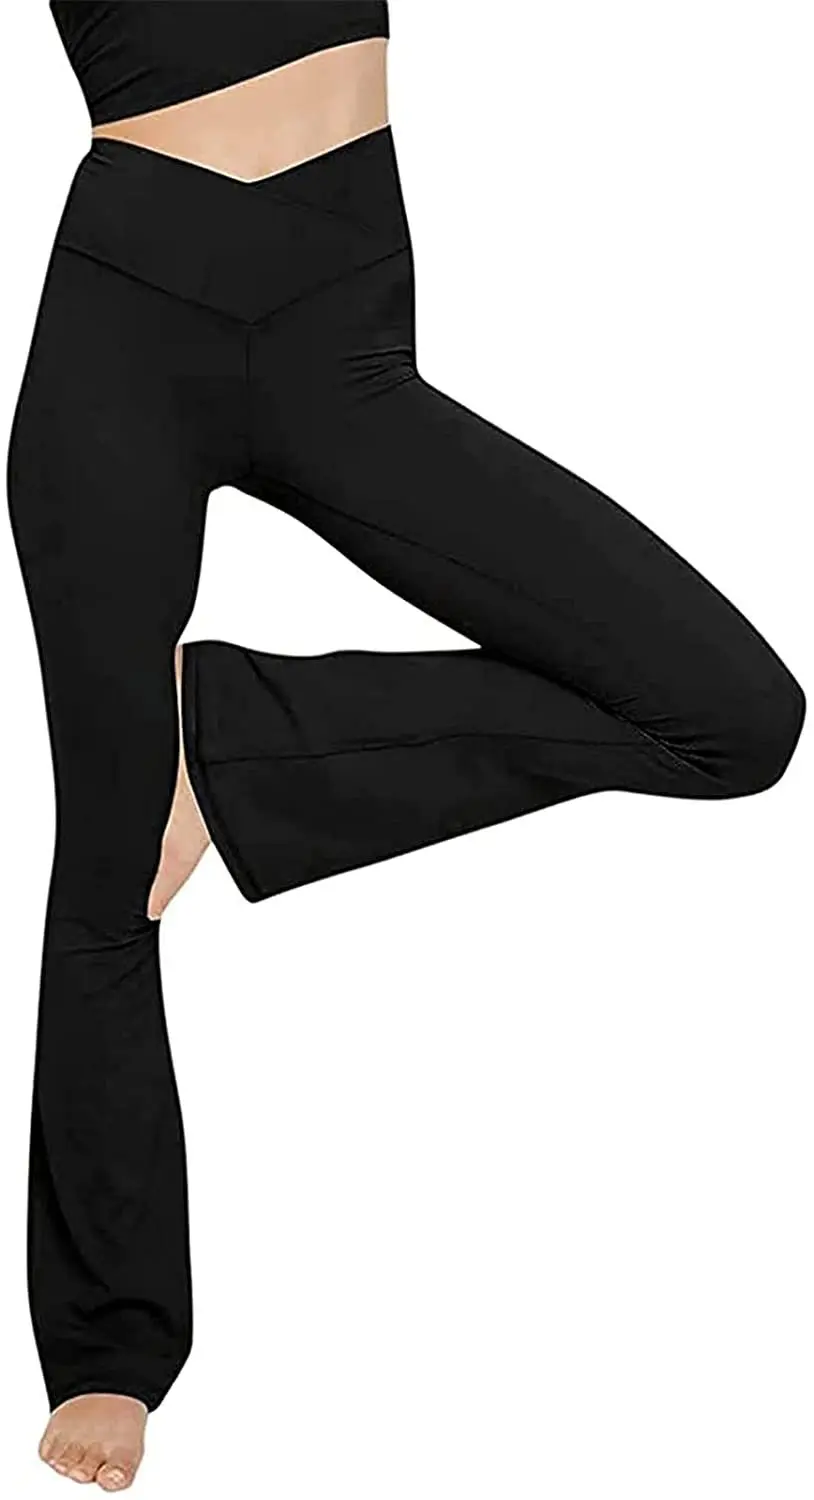 Loose Pants Home Women's Leggin Leggings Workout Clothes Capris Track  Sports Gym Tights Print Crossover Flare Yoga Clothing Long - Yoga Pants -  AliExpress